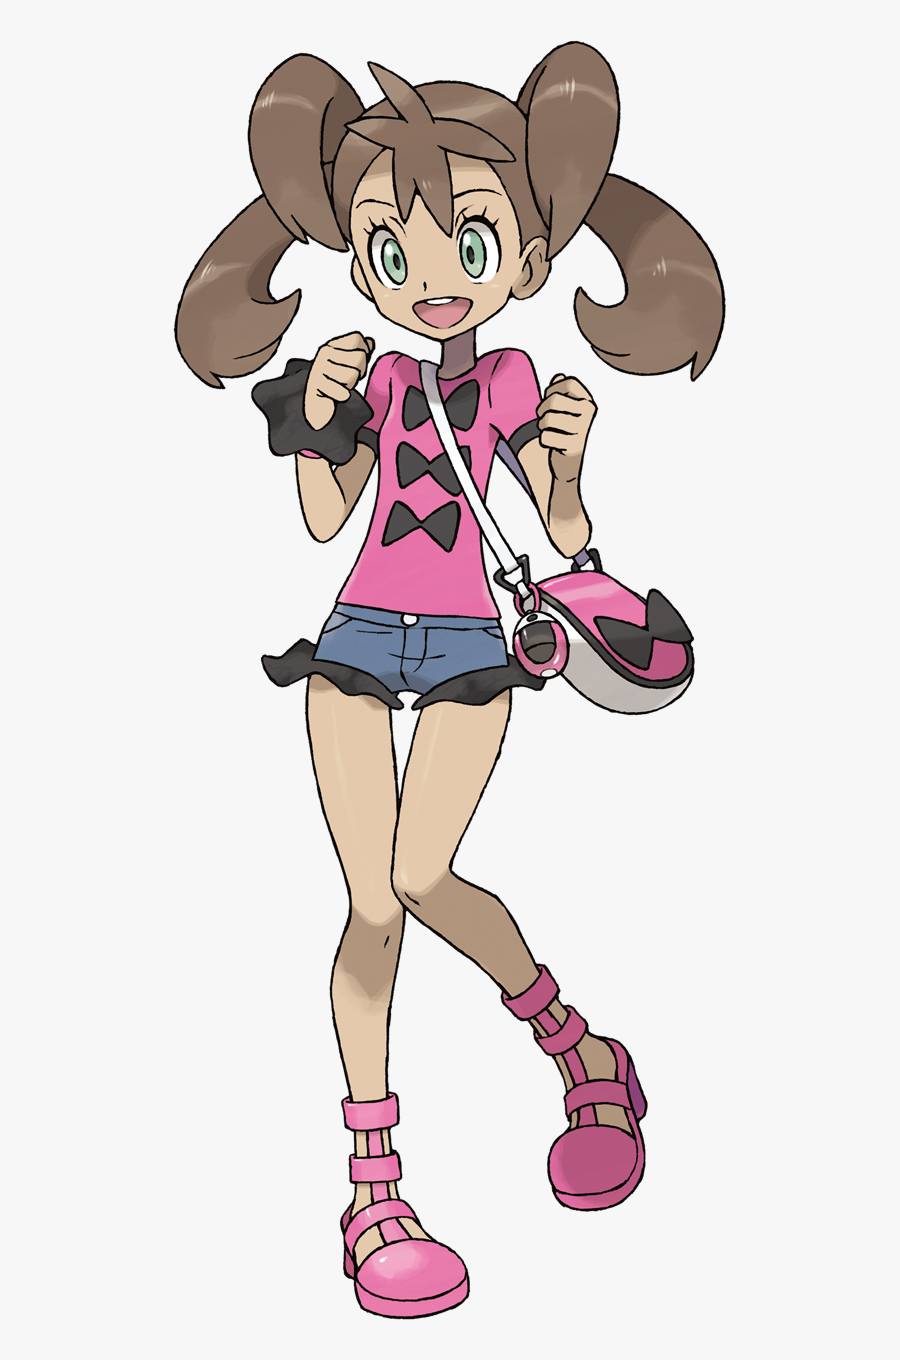 Official Pokemon Trainer Art - Pokemon Xy Girl Characters, Transparent Clipart